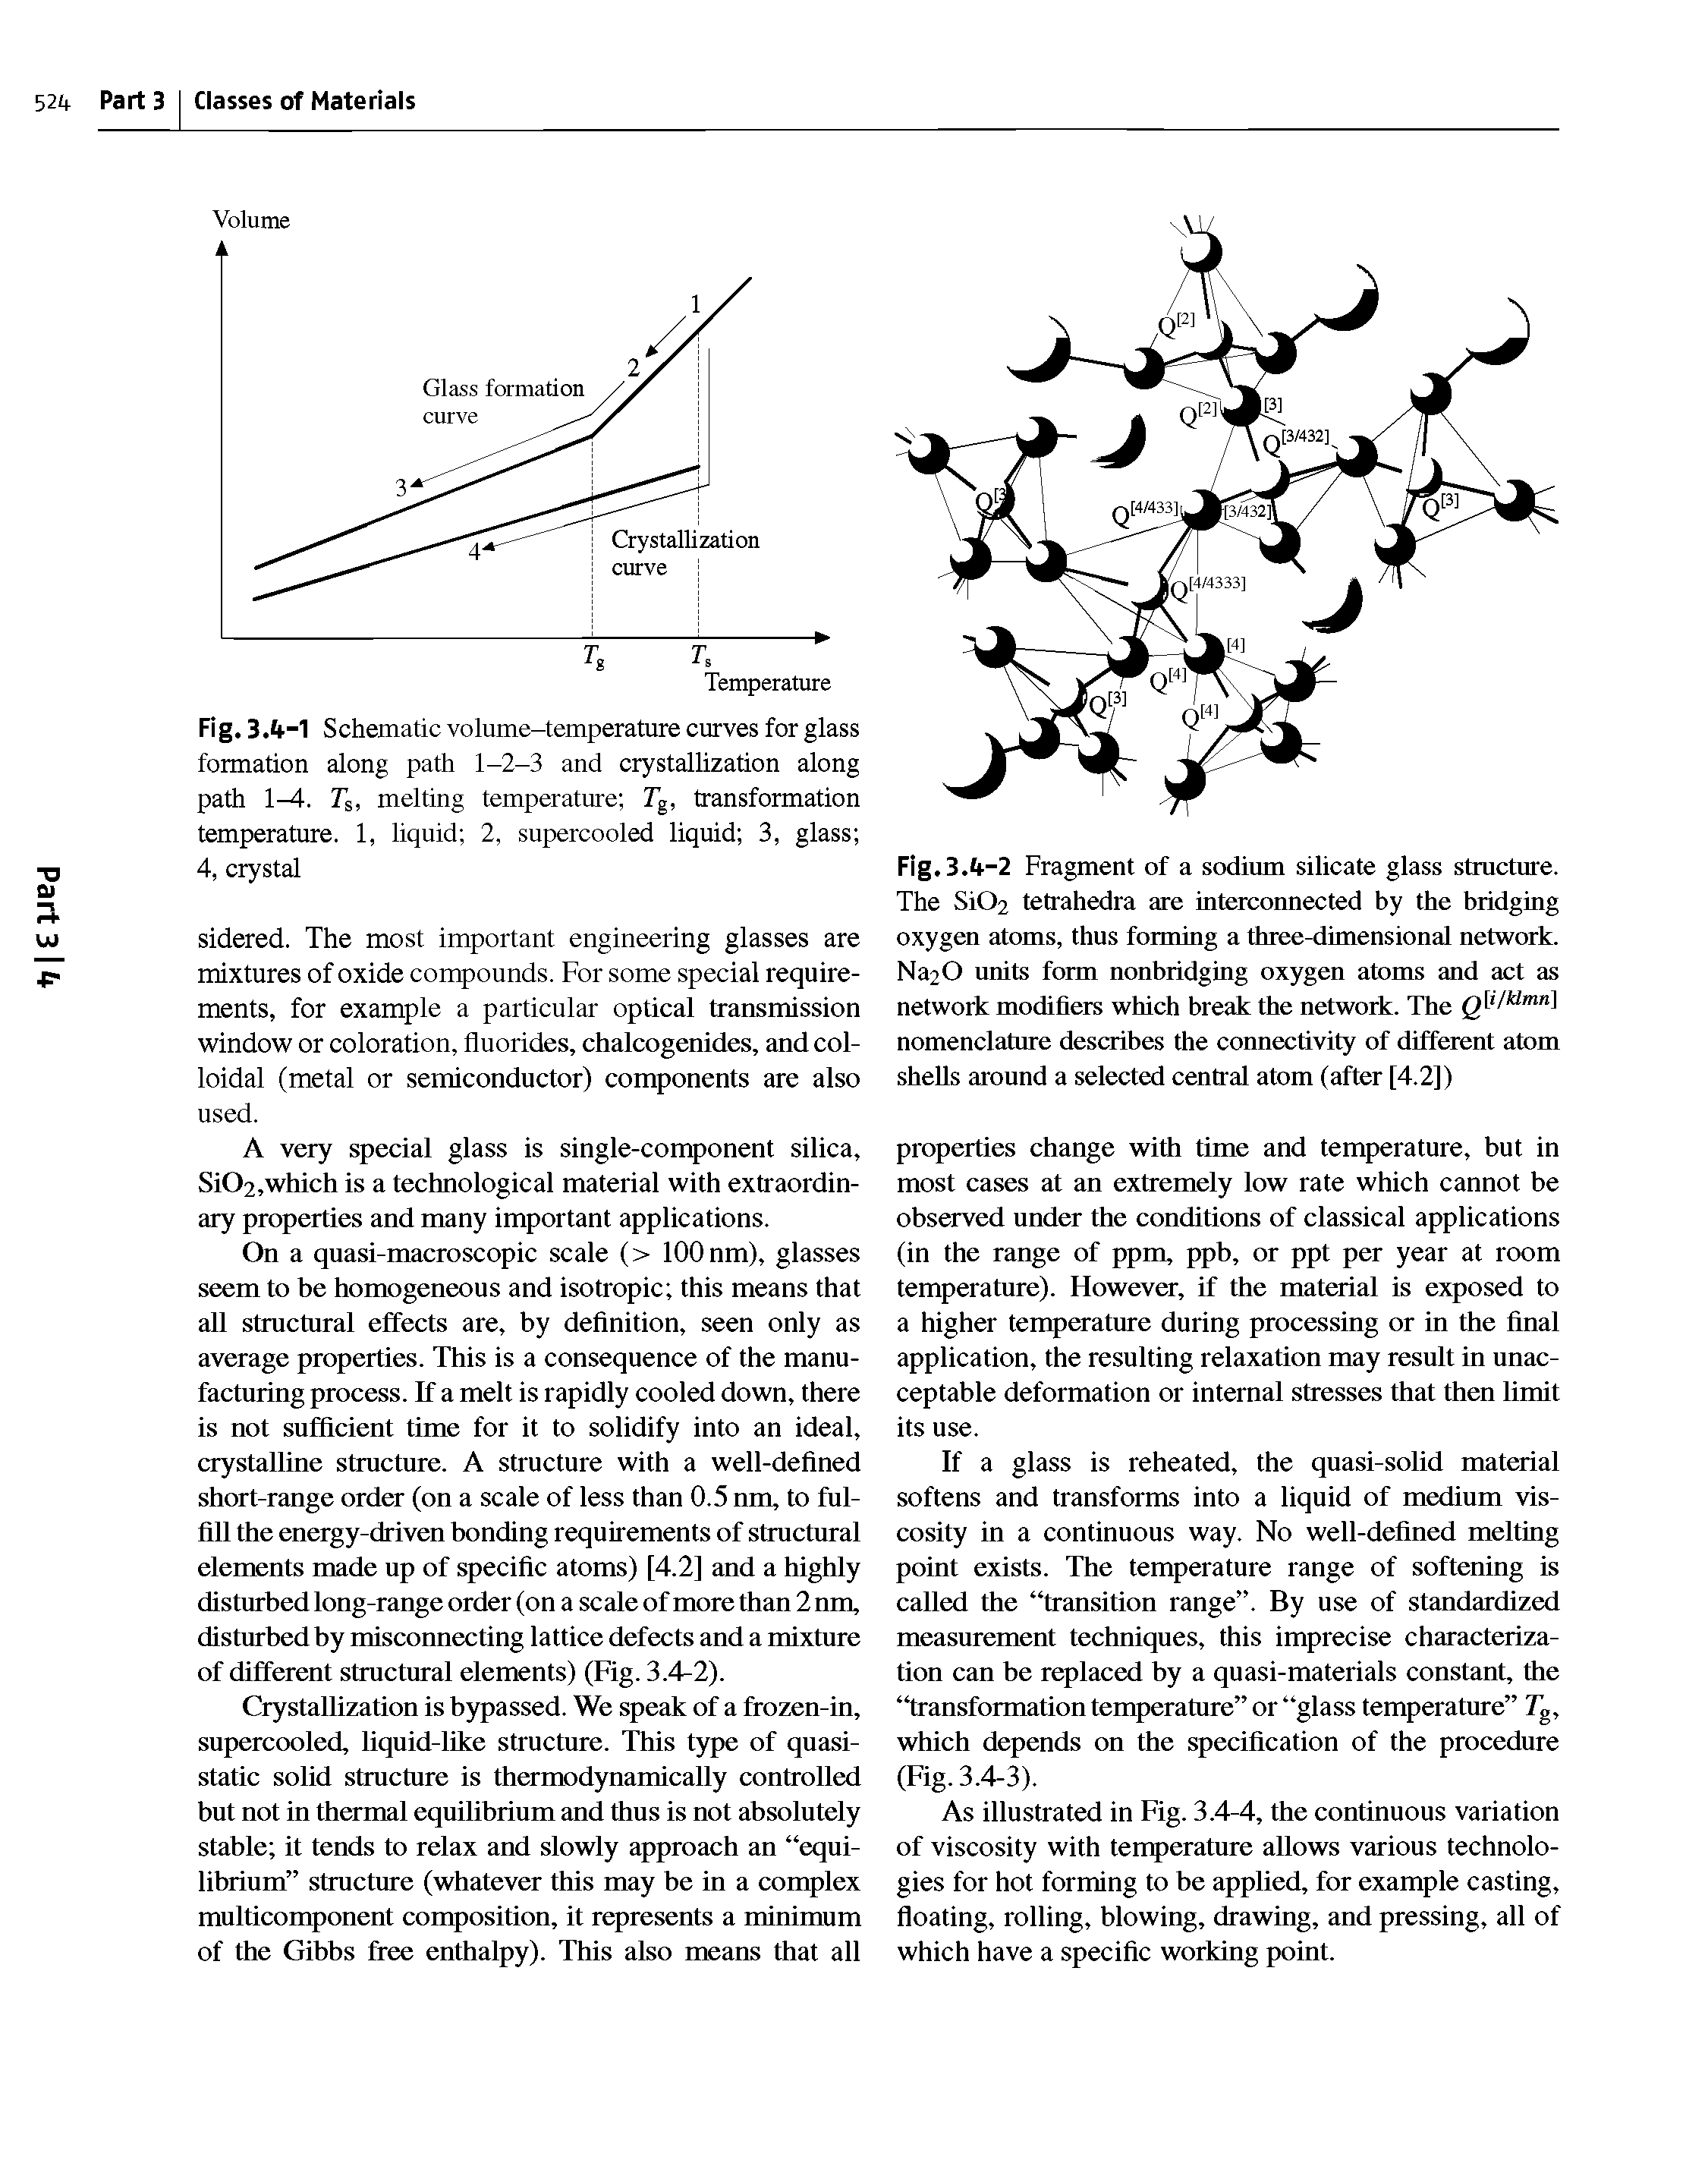 Fig.3. -1 Schematic volume-temperature curves for glass formation along path 1-2-3 and crystallization along path 1-4. Ts, melting temperature Tg, transformation temperature. 1, liquid 2, supercooled liquid 3, glass 4, crystal...